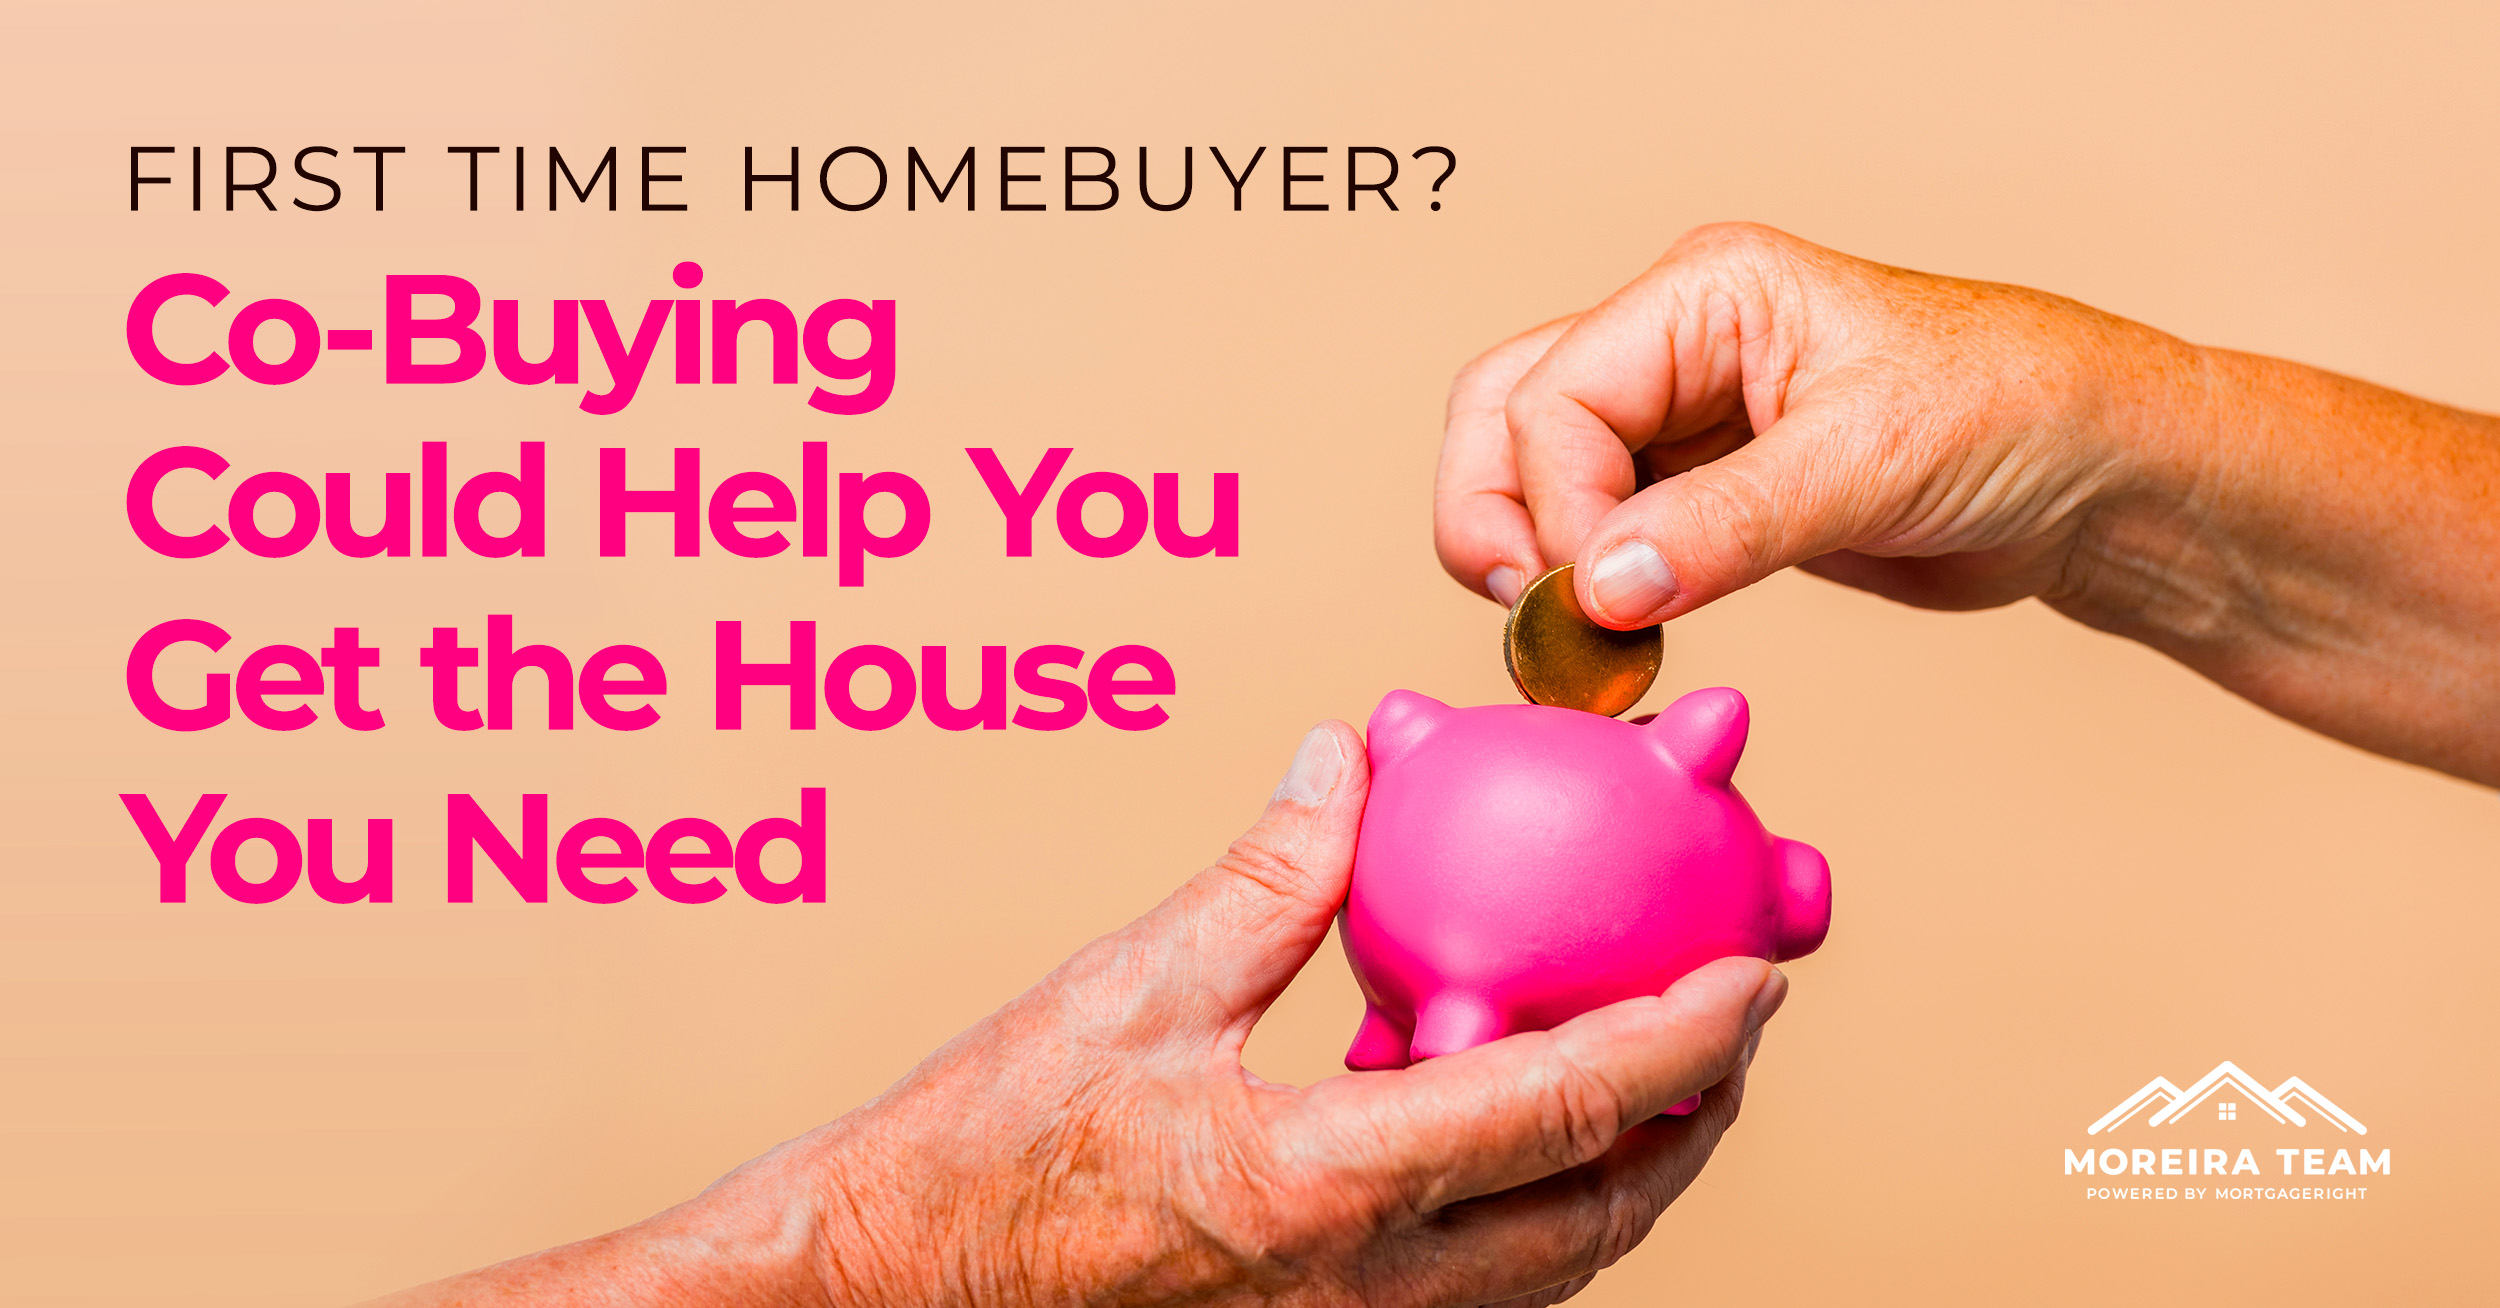 Can Co-Buying Help You Get the House You Need?